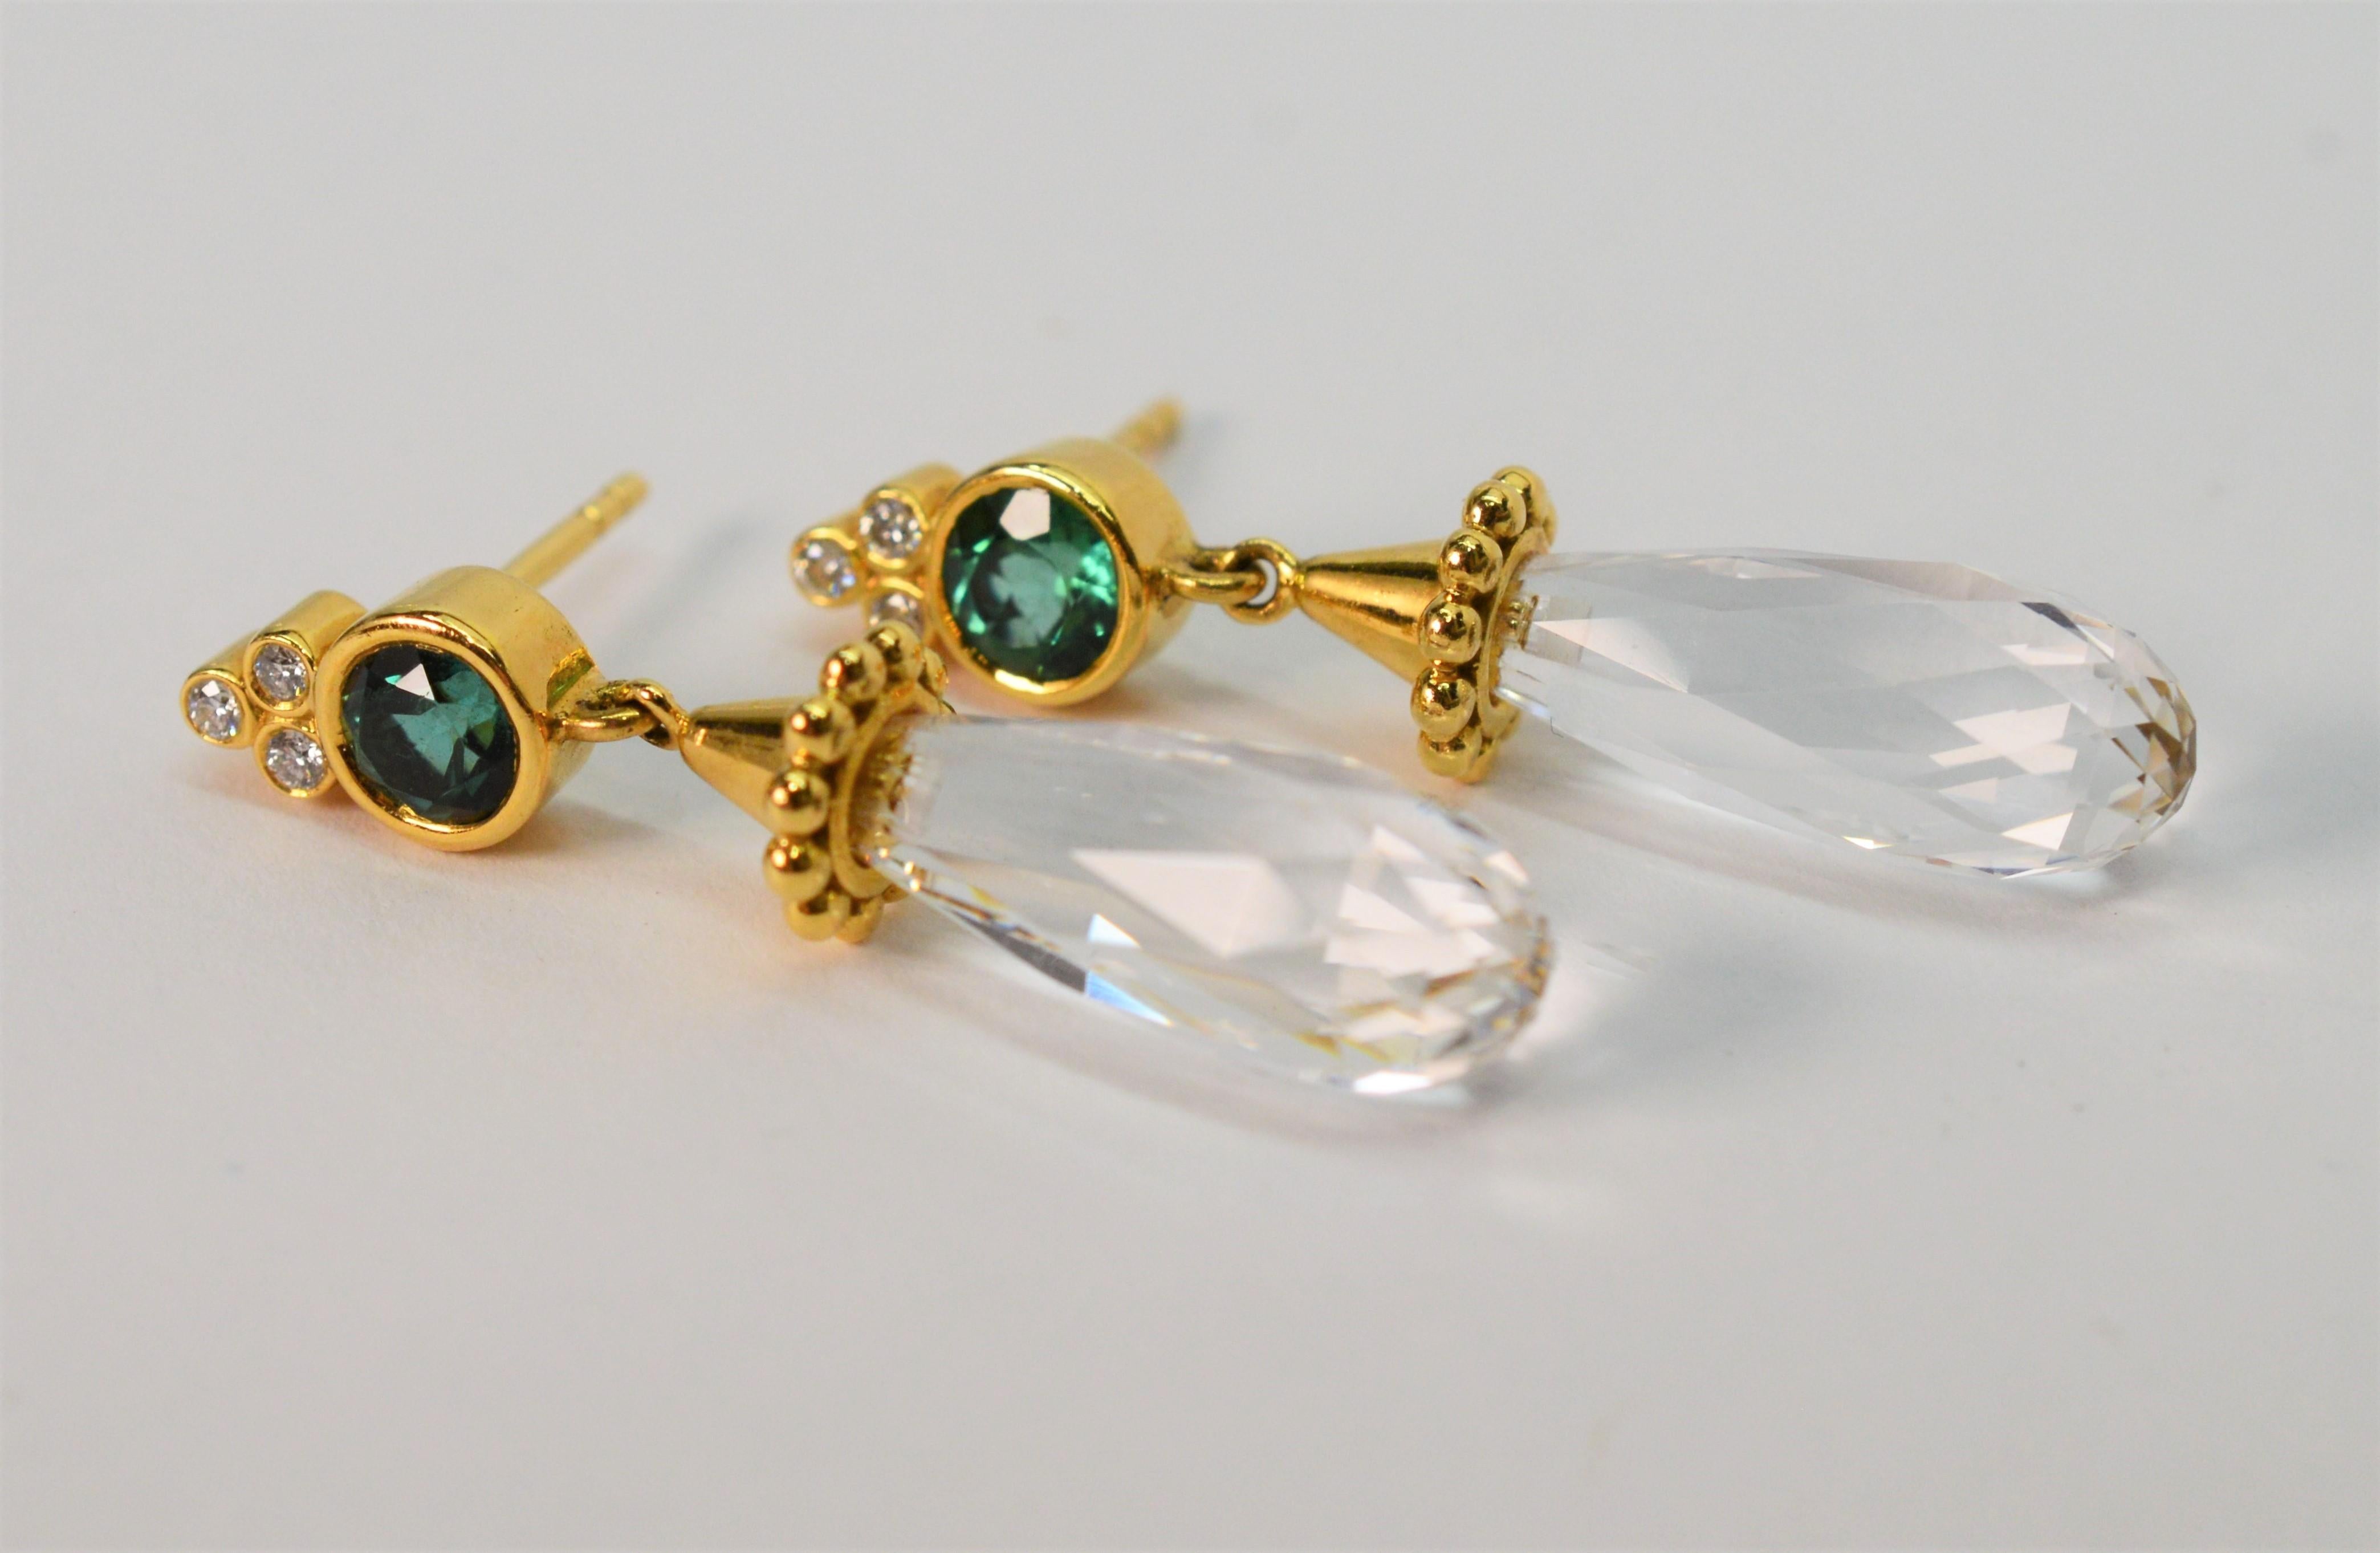 Stunning briolette rock crystal teardrops catch light and shimmer as they dangle from fancy trumpeted eighteen karat 18K yellow gold findings. A bezel set .40 carat faceted emerald with .03 carat H/VS diamond accents divinely adorn each stud